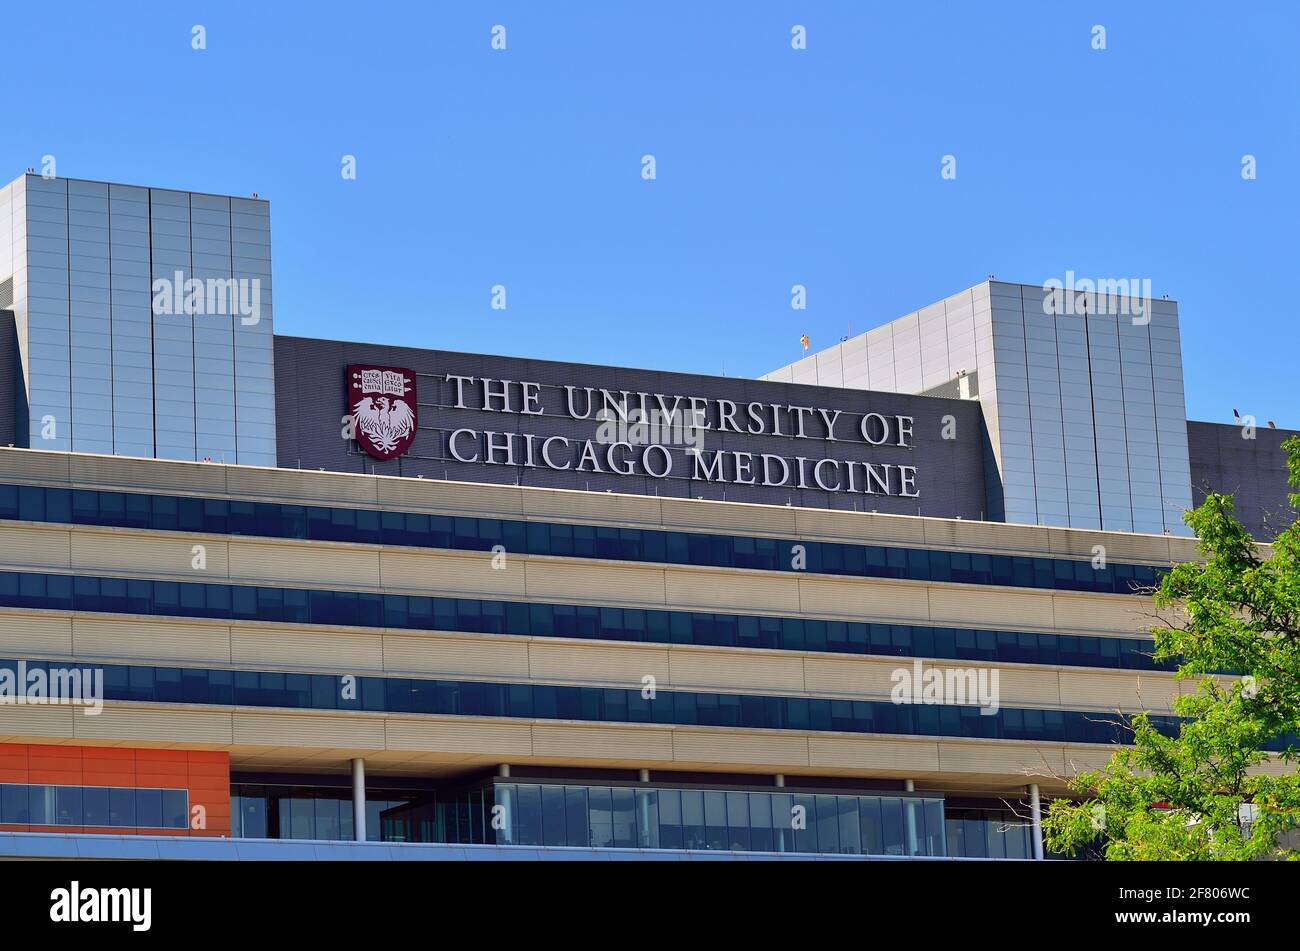 Chicago, Illinois, USA. One of the buildings in the University of Chicago Medical Center complex. Stock Photo